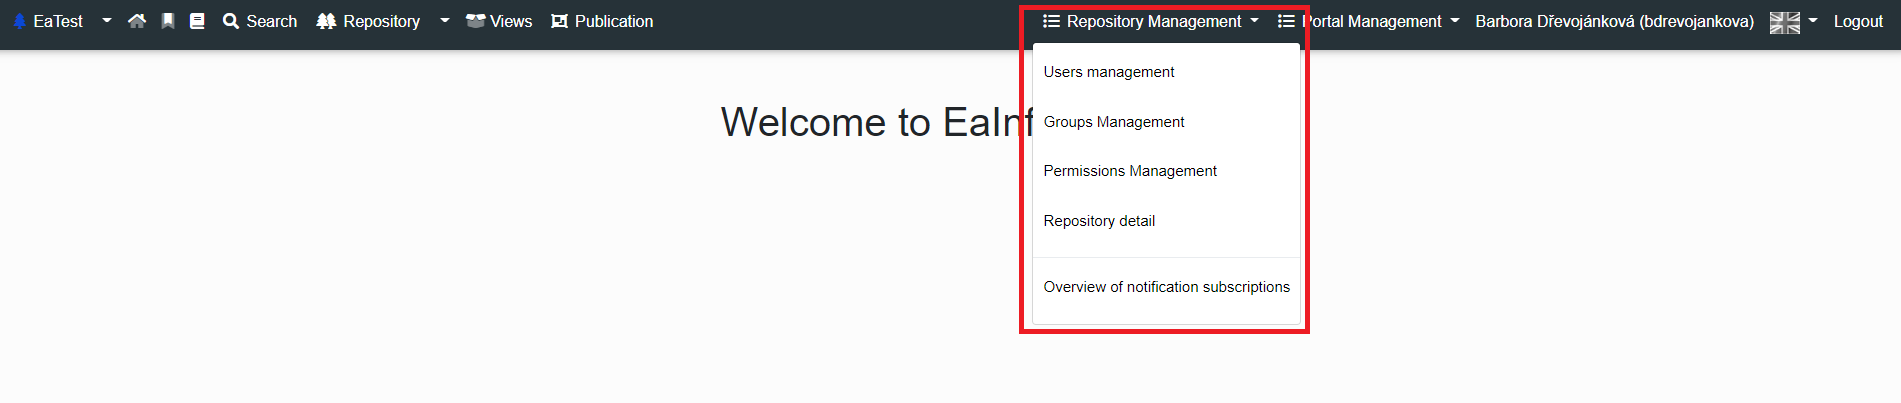 repository manager1.png